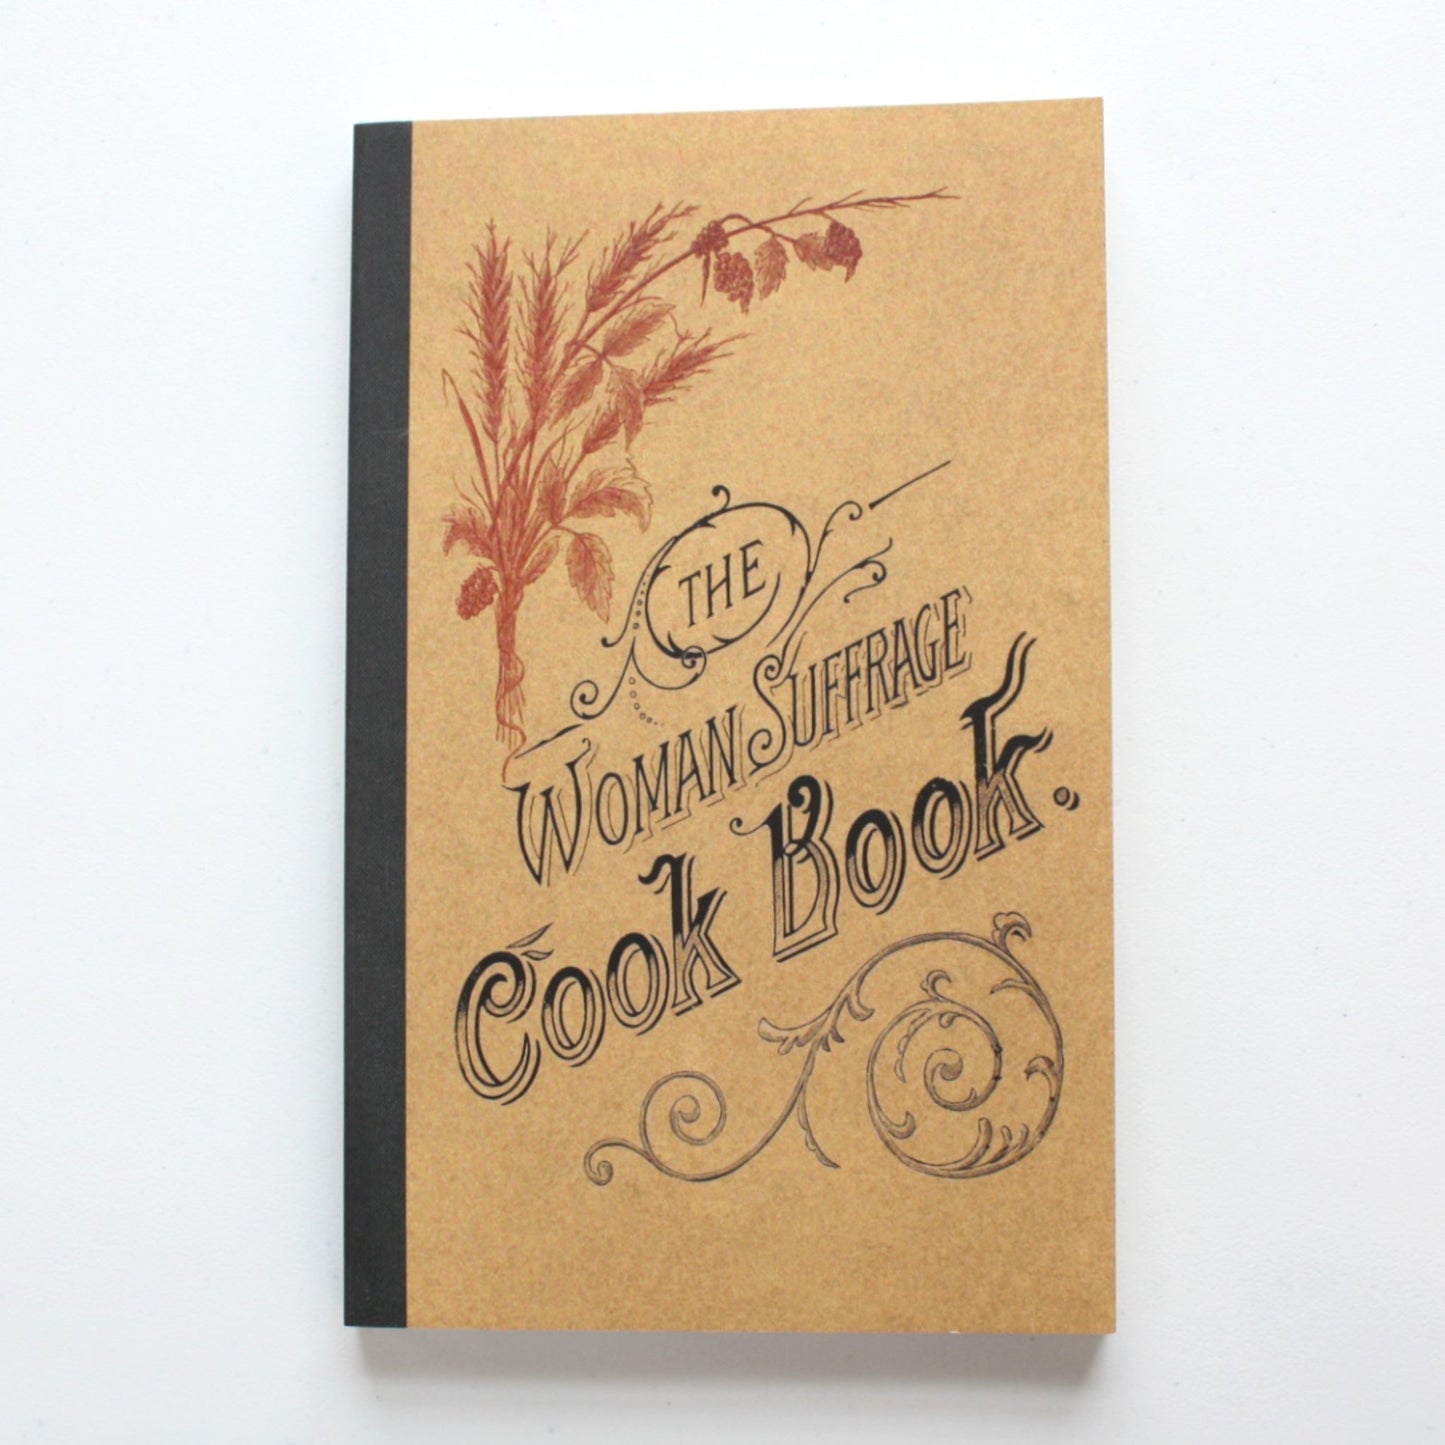 The Woman Suffrage Cook Book - Made in the USA